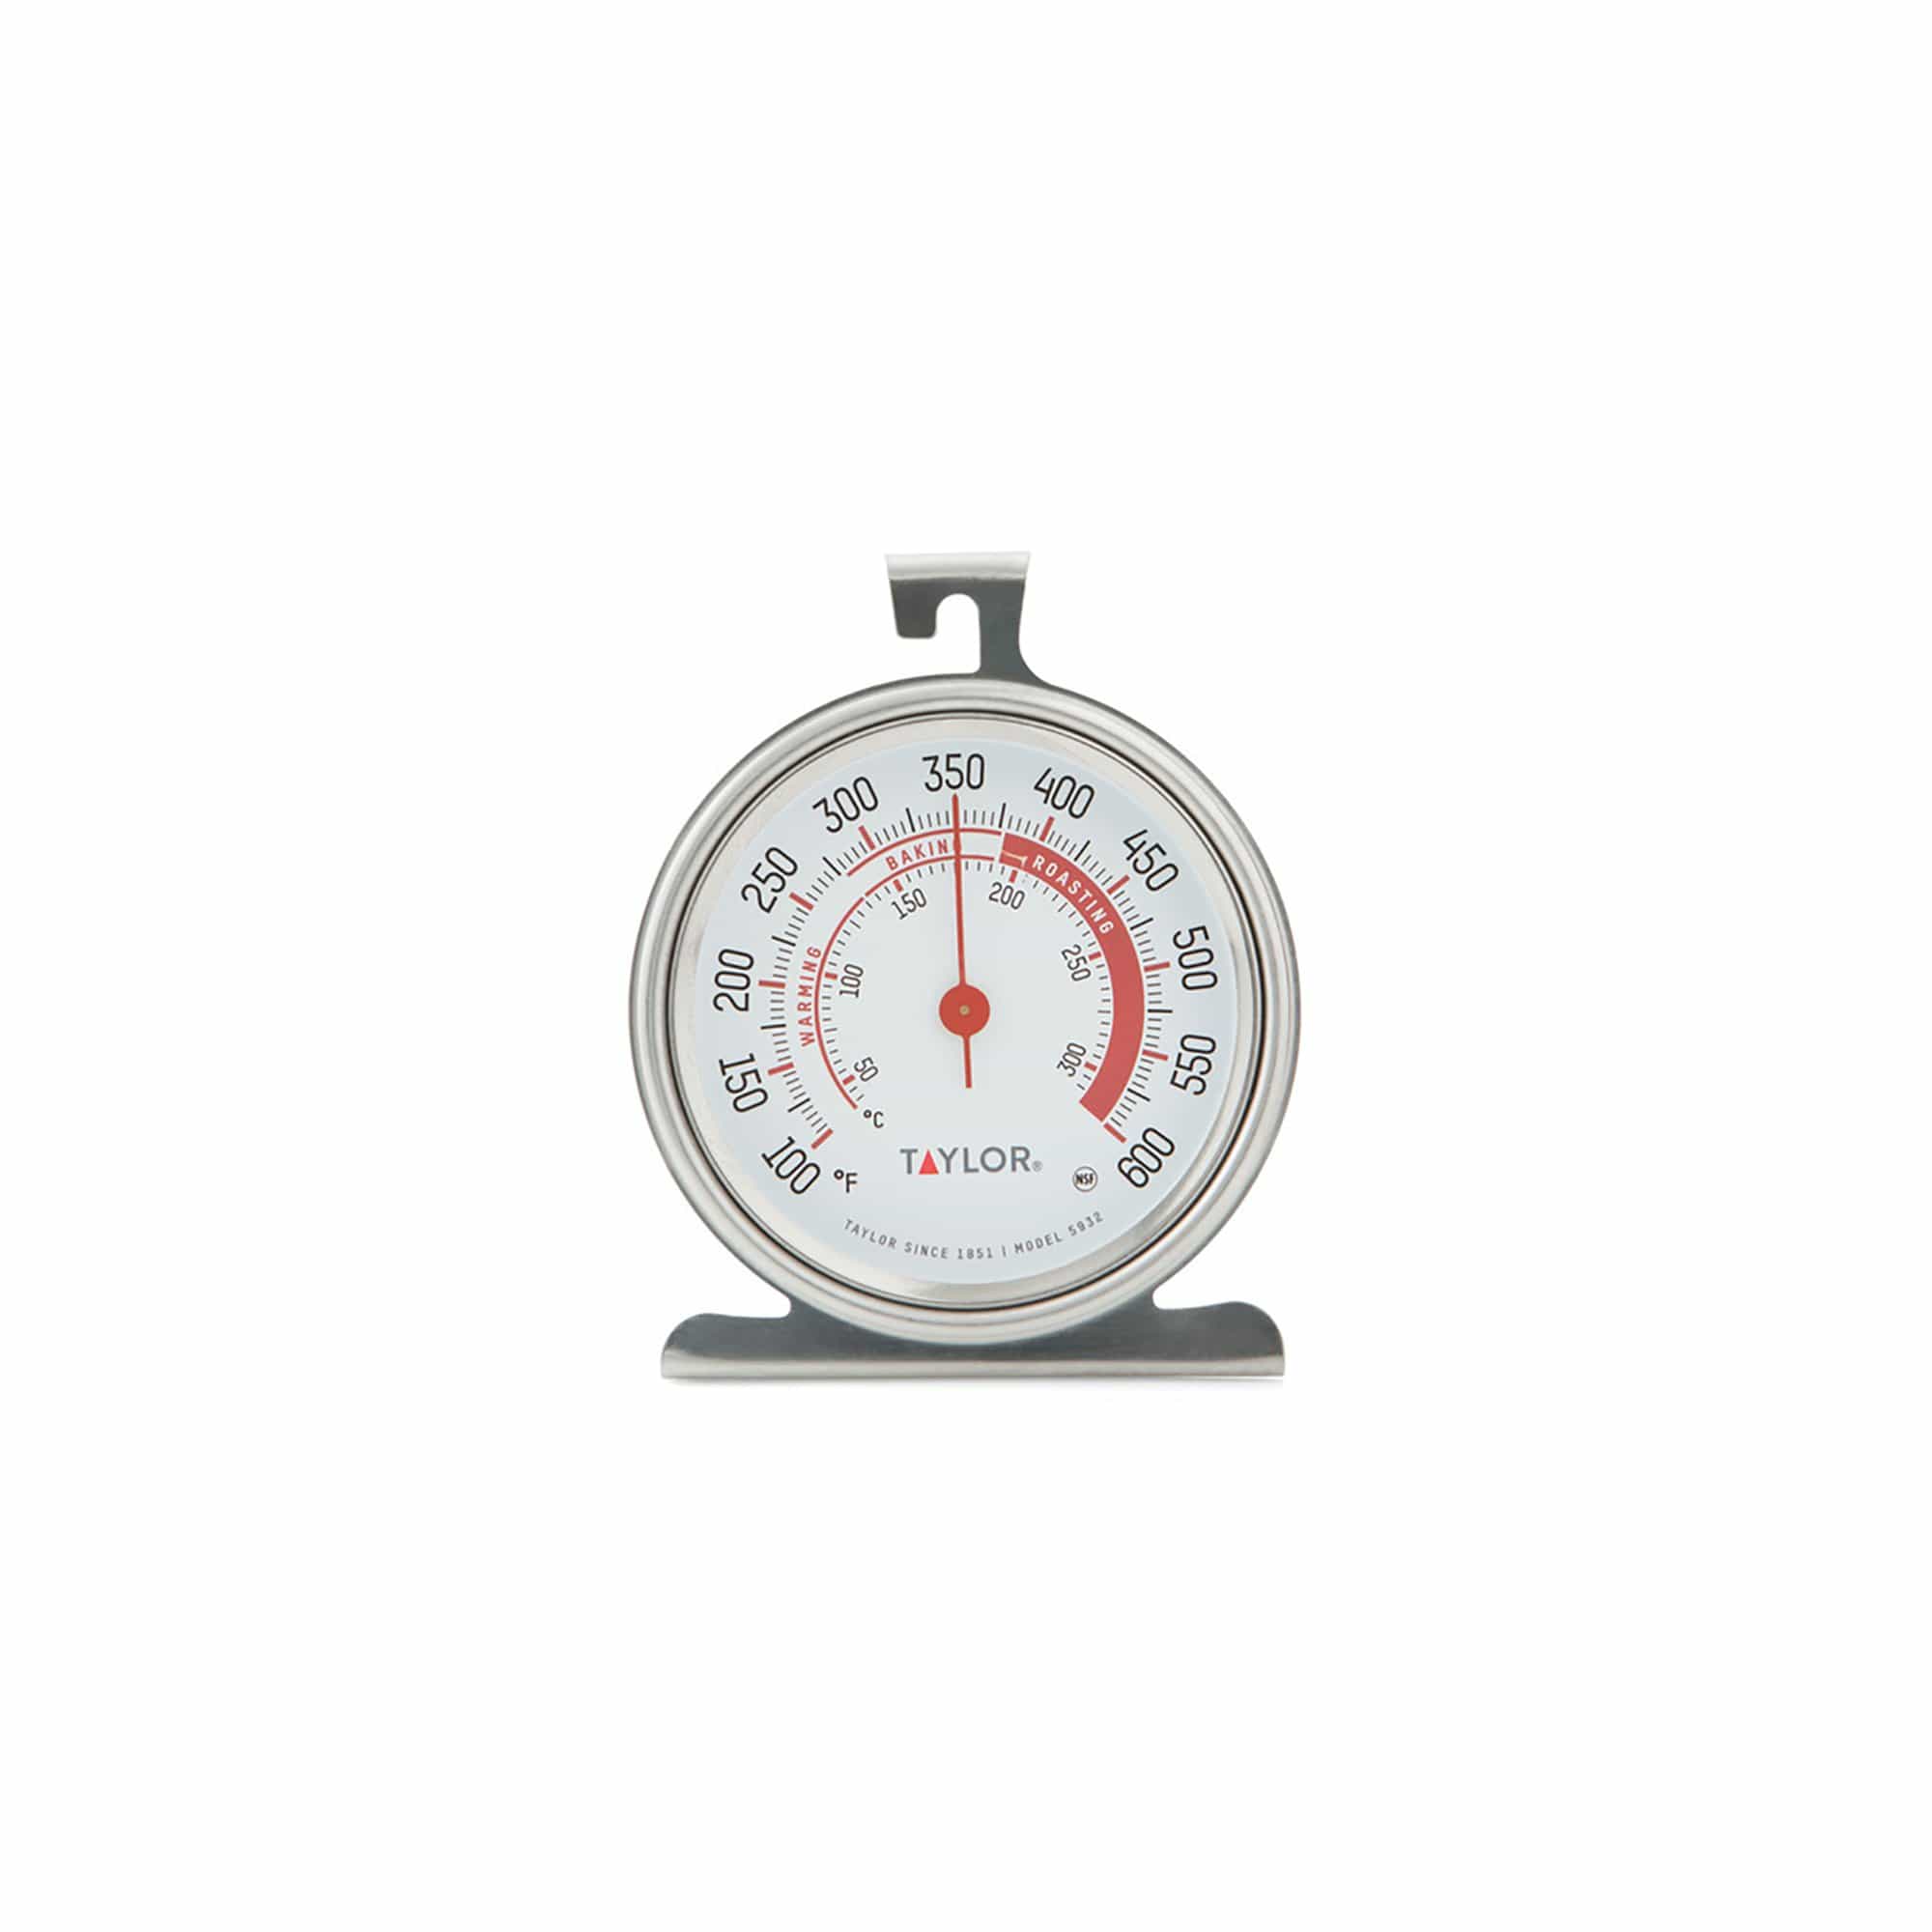 Taylor Analog Oven Thermometer | Oven Tester